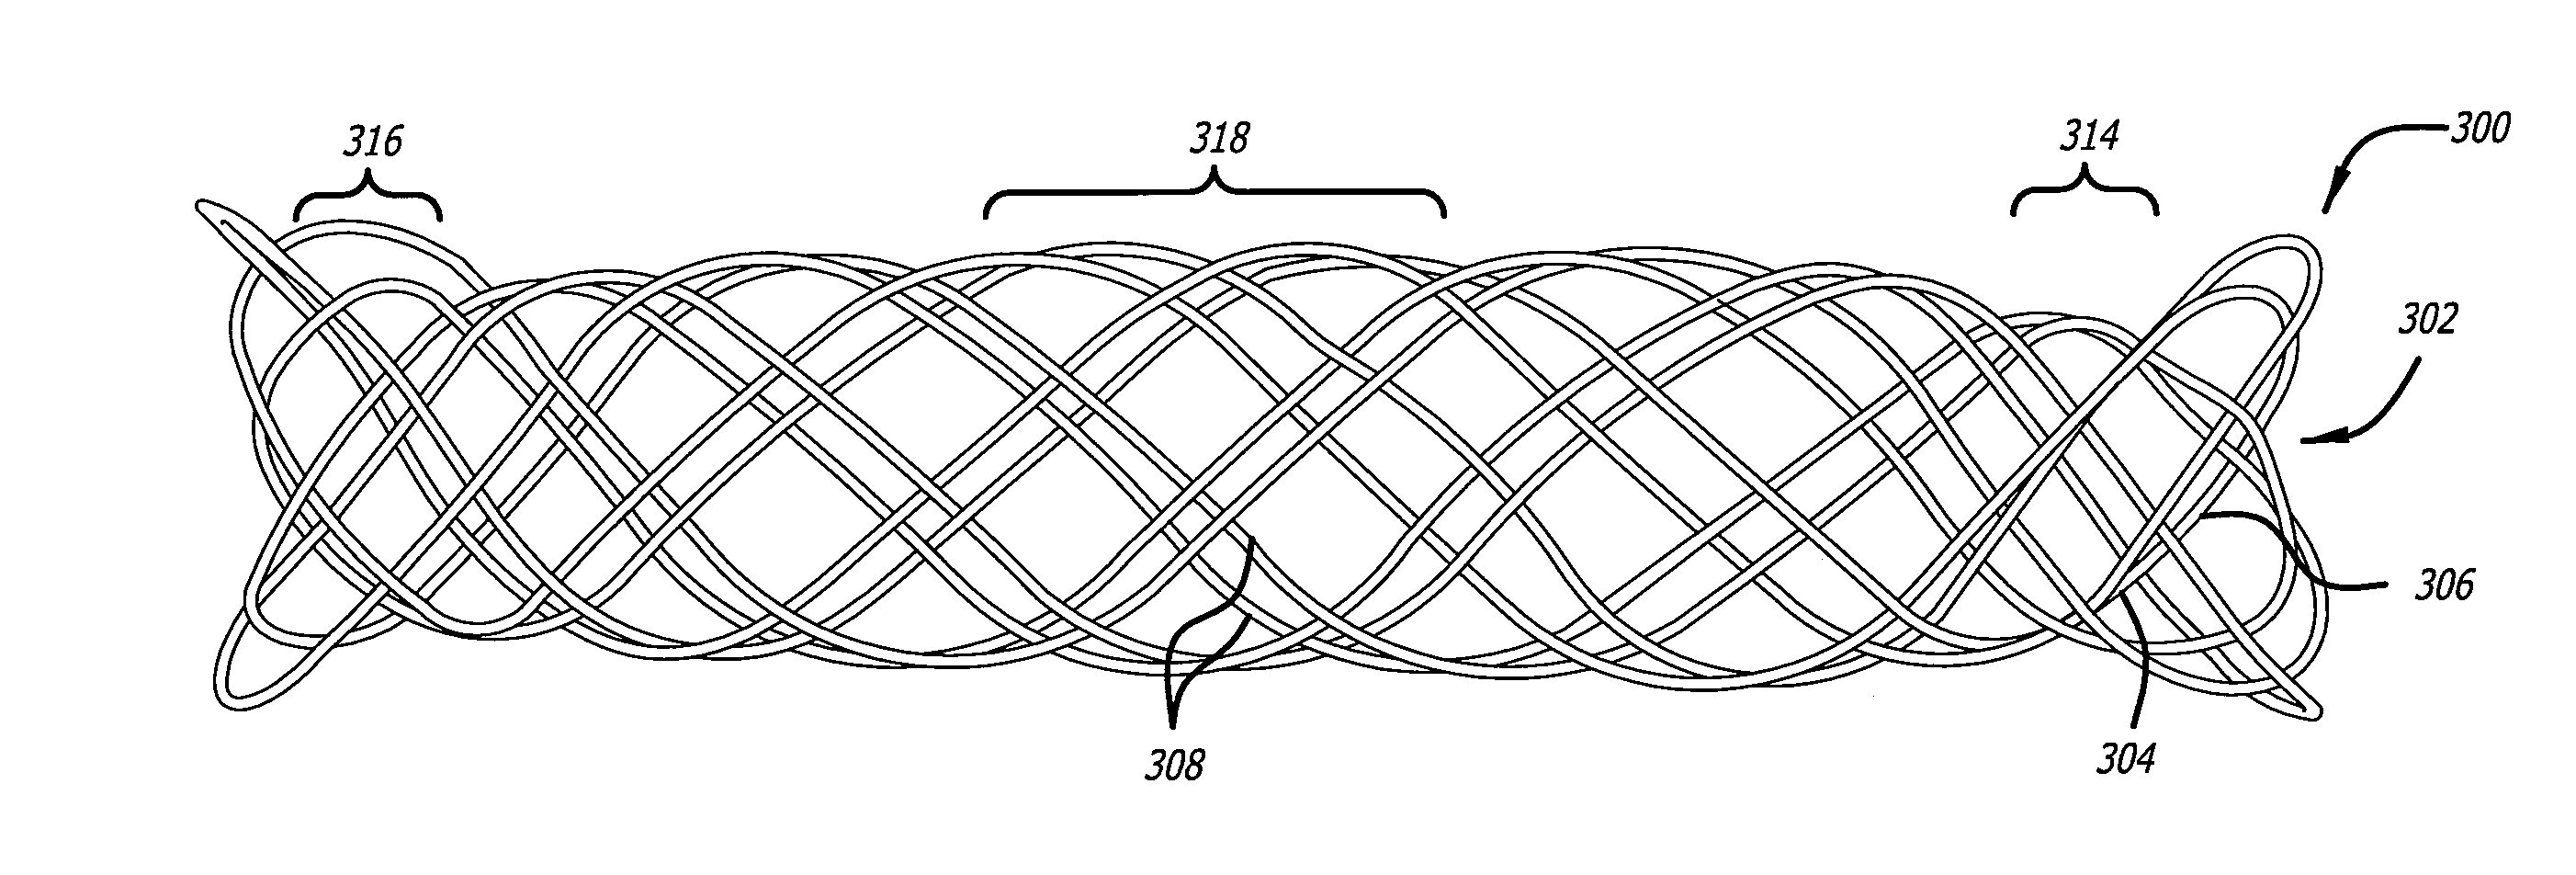 Tracheobronchial implantable medical device and methods of use